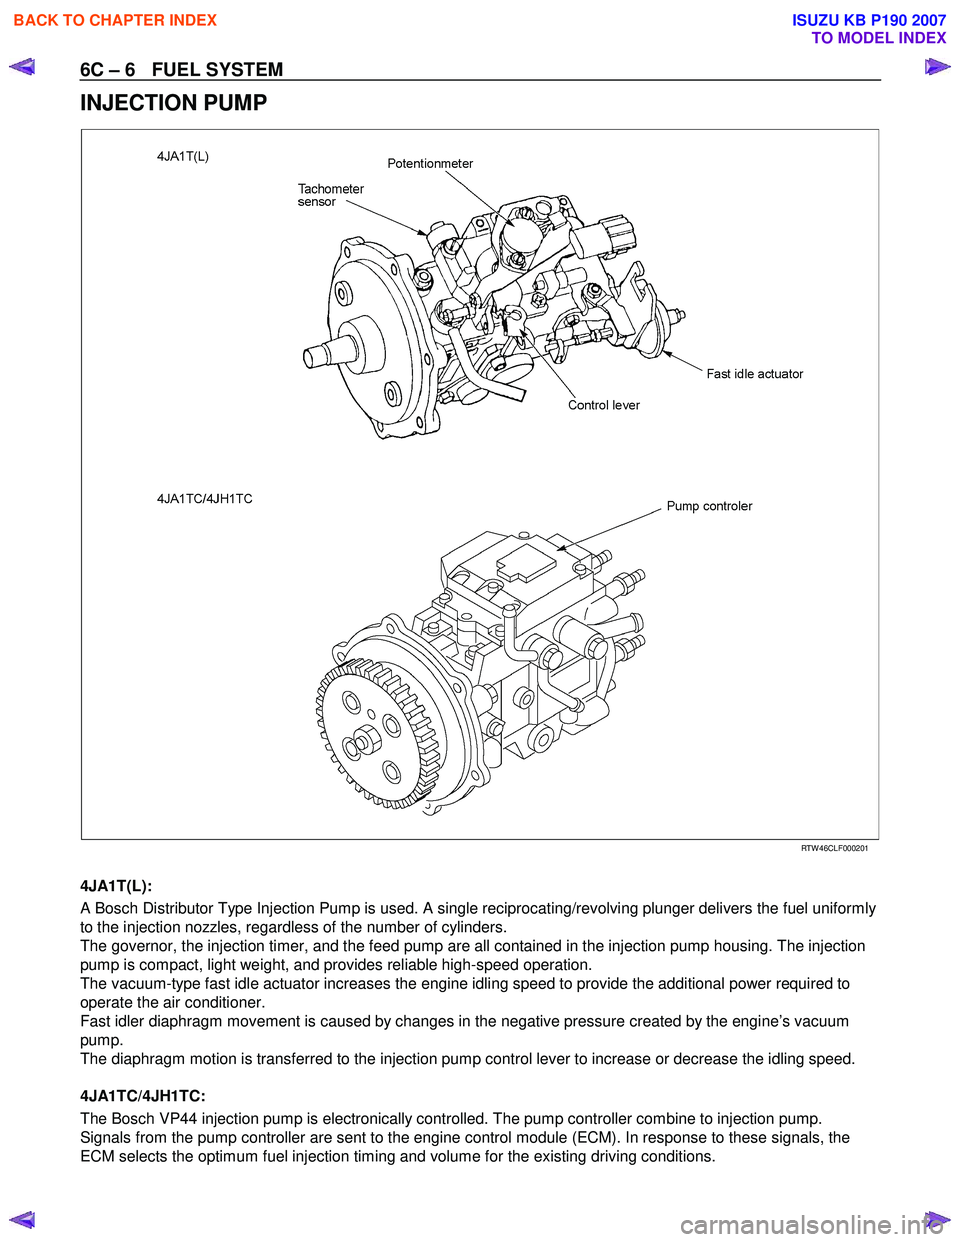 ISUZU KB P190 2007  Workshop Owners Manual 6C – 6   FUEL SYSTEM 
INJECTION PUMP 
  
 
 
RTW 46CLF000201 
  
4JA1T(L):  
A Bosch Distributor Type Injection Pump is used. A single reciprocating/revolving plunger delivers the fuel uniformly  
t